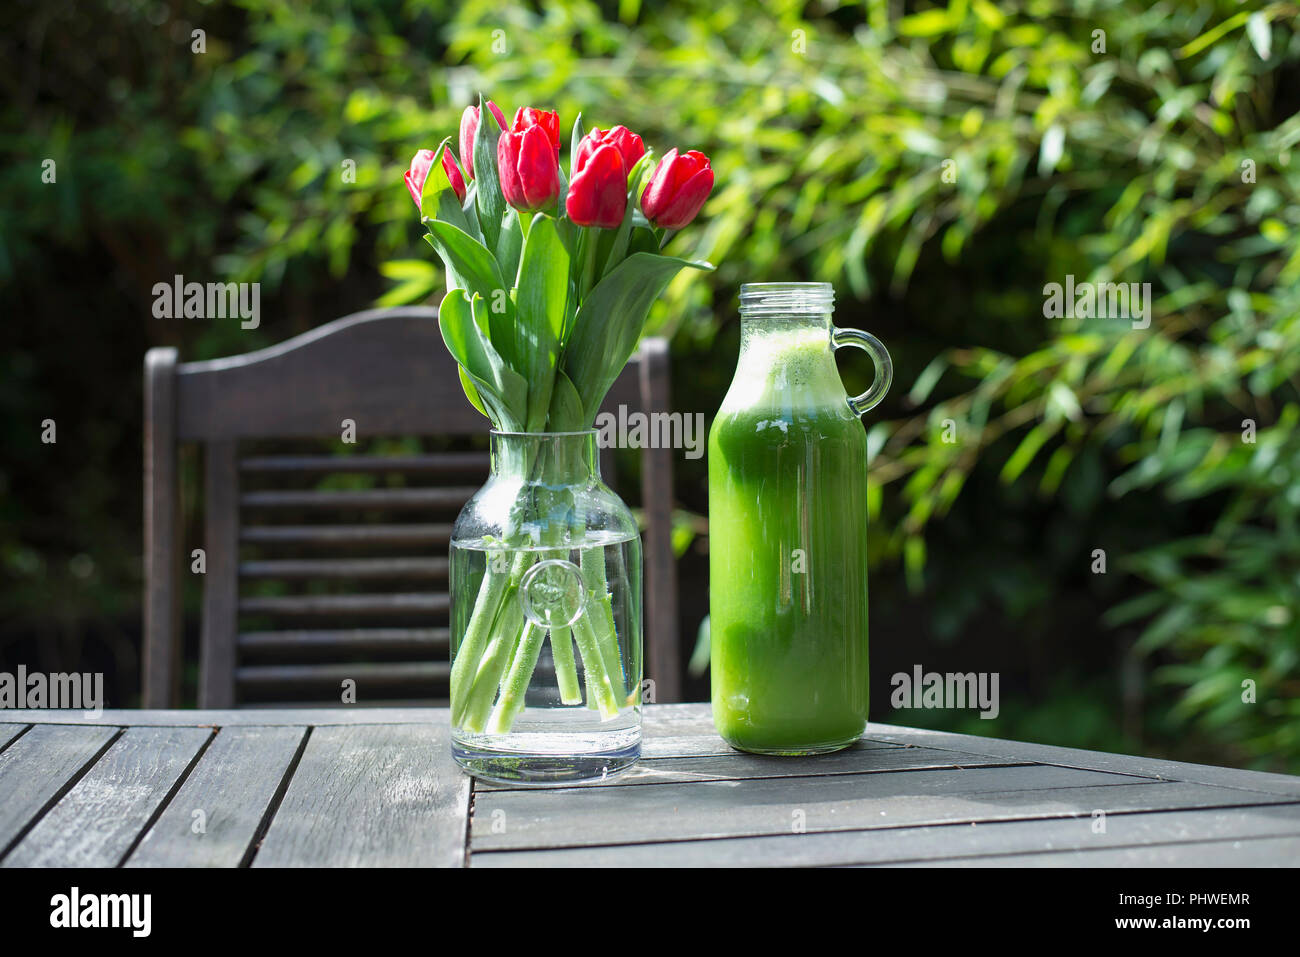 Fresh red tulips and green juice on wooden garden table. Authentic outdoor lifestyle photo with lush green background. RF home decor concept. UK Stock Photo